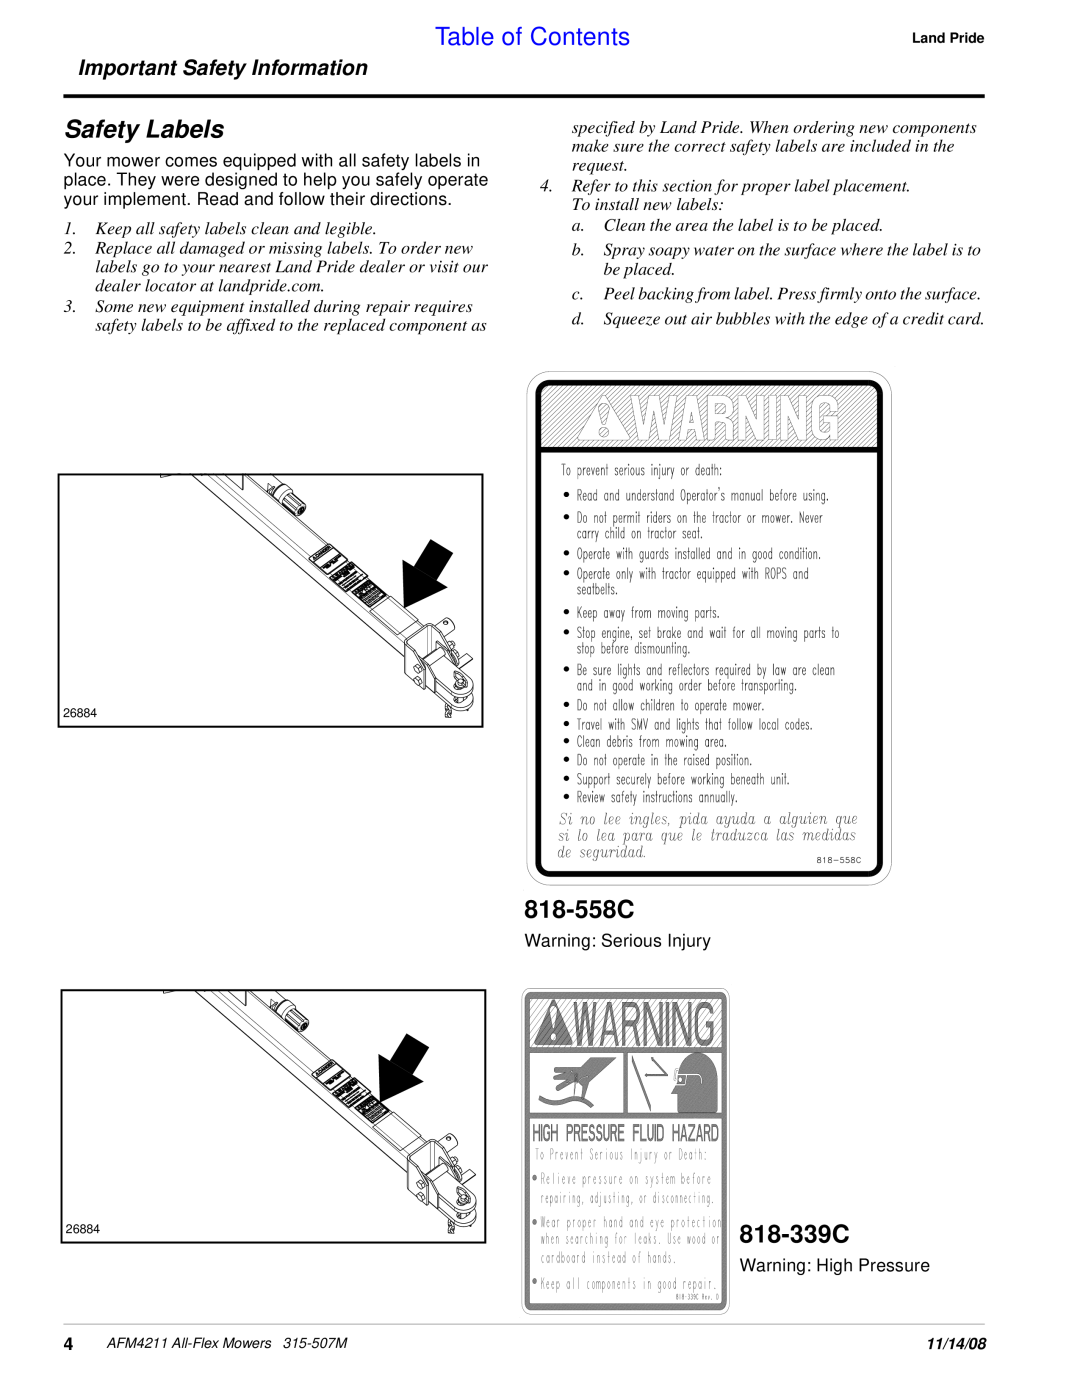 Land Pride AFM4211 manual Safety Labels, 818-339C, 818-558C, Table of Contents, Important Safety Information 